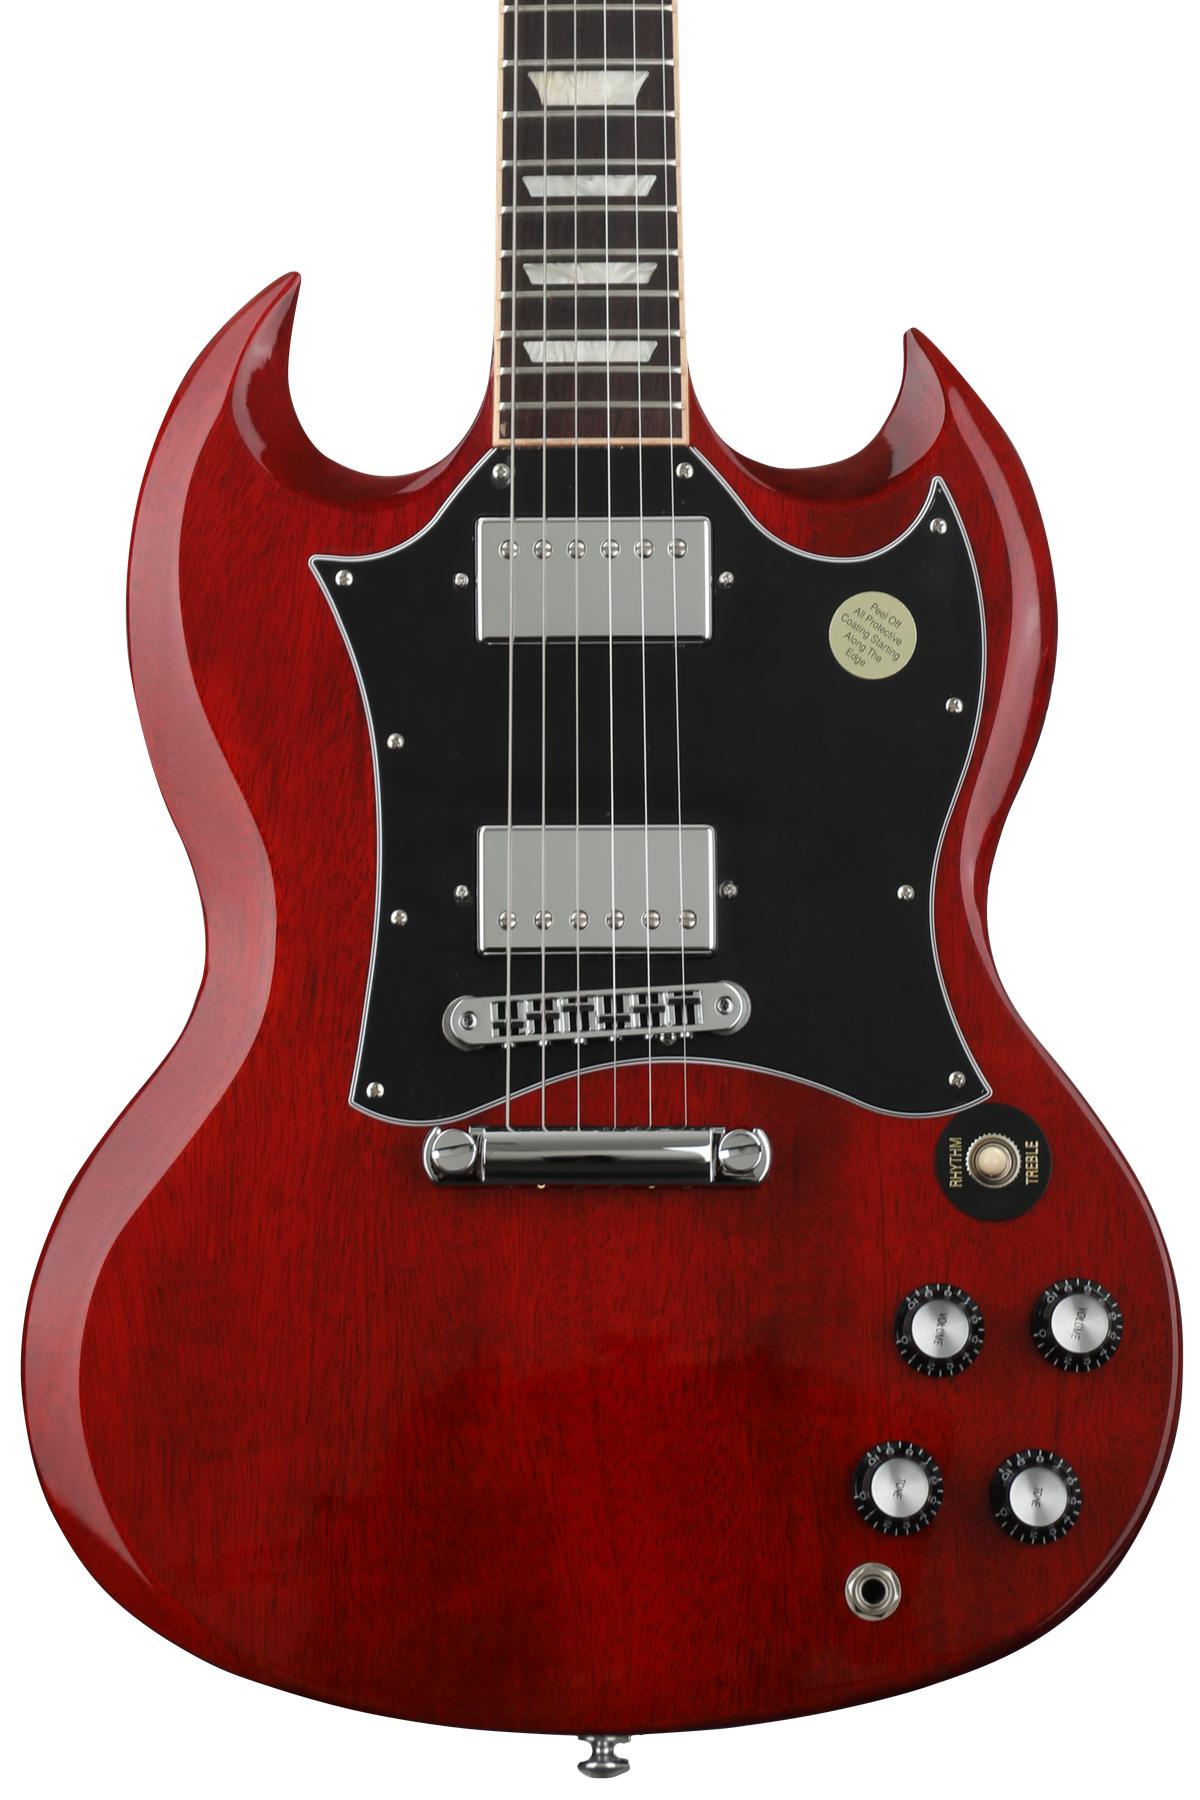 Gibson SG Standard Electric Guitar - Heritage Cherry